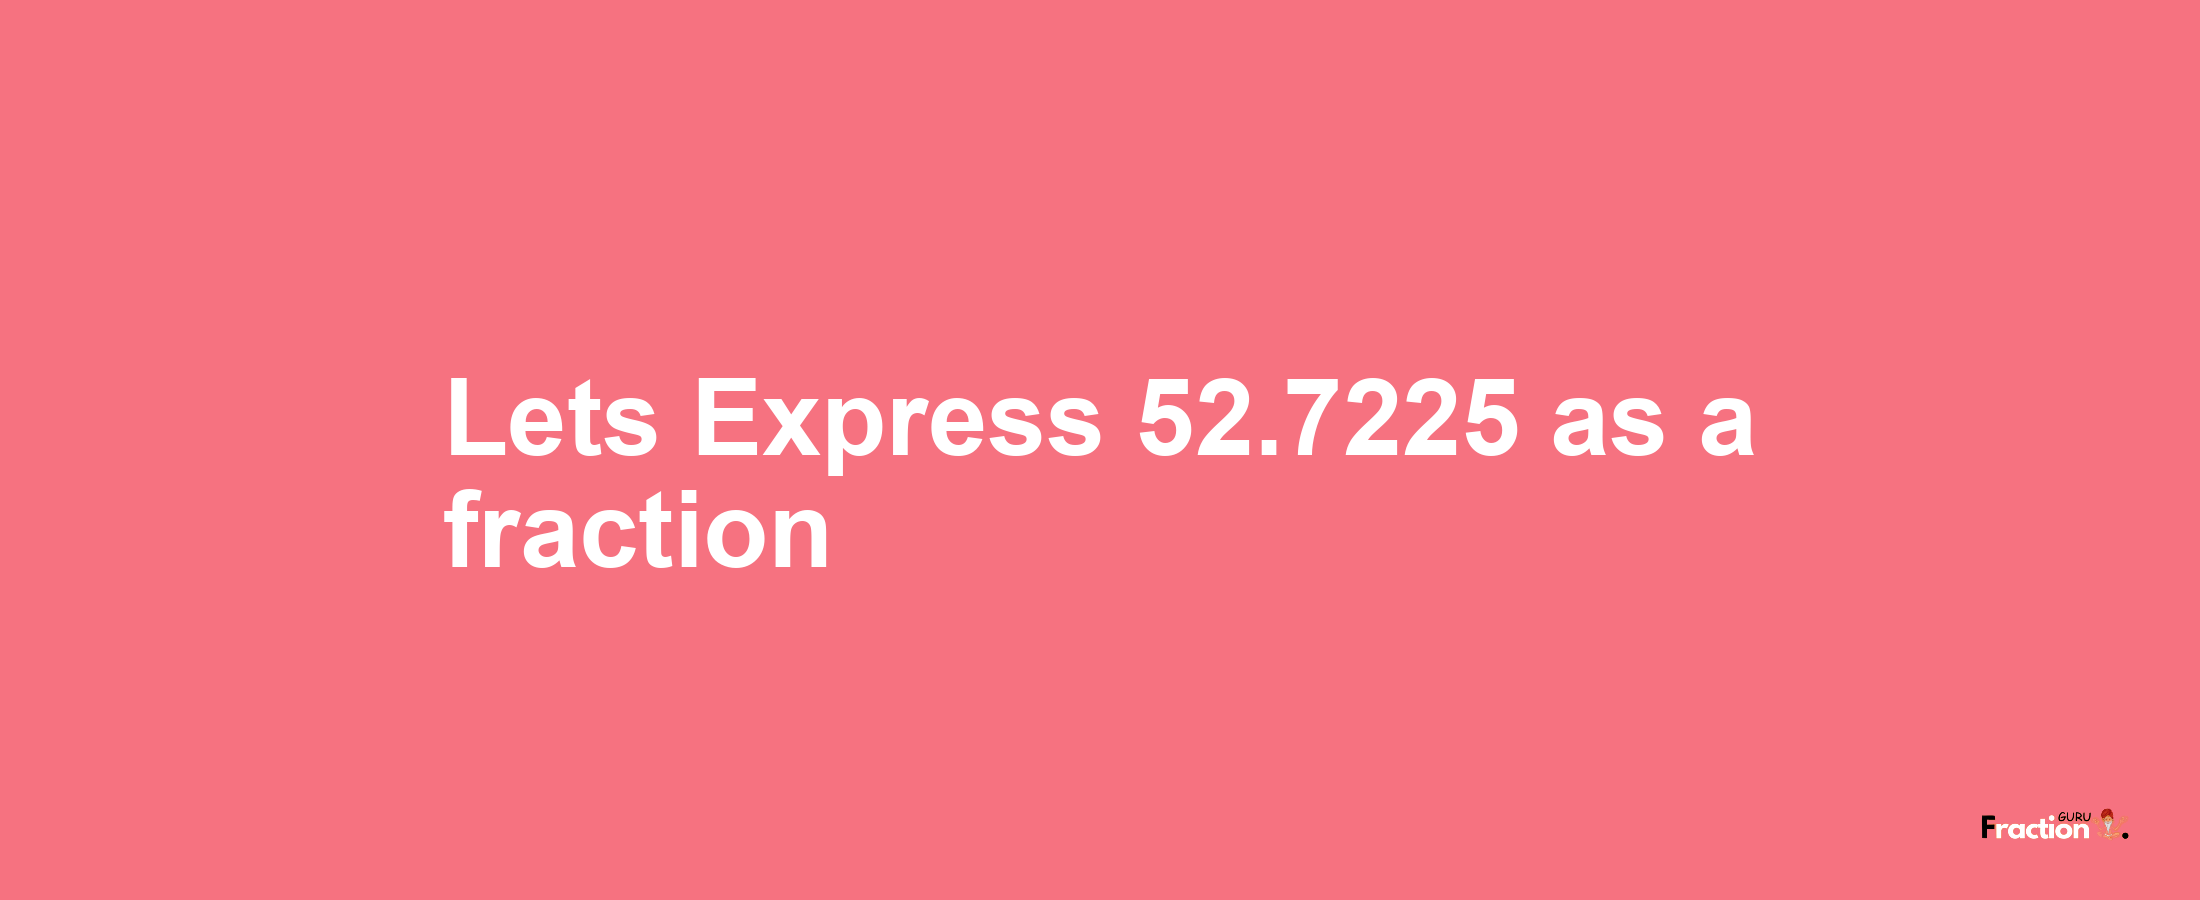 Lets Express 52.7225 as afraction